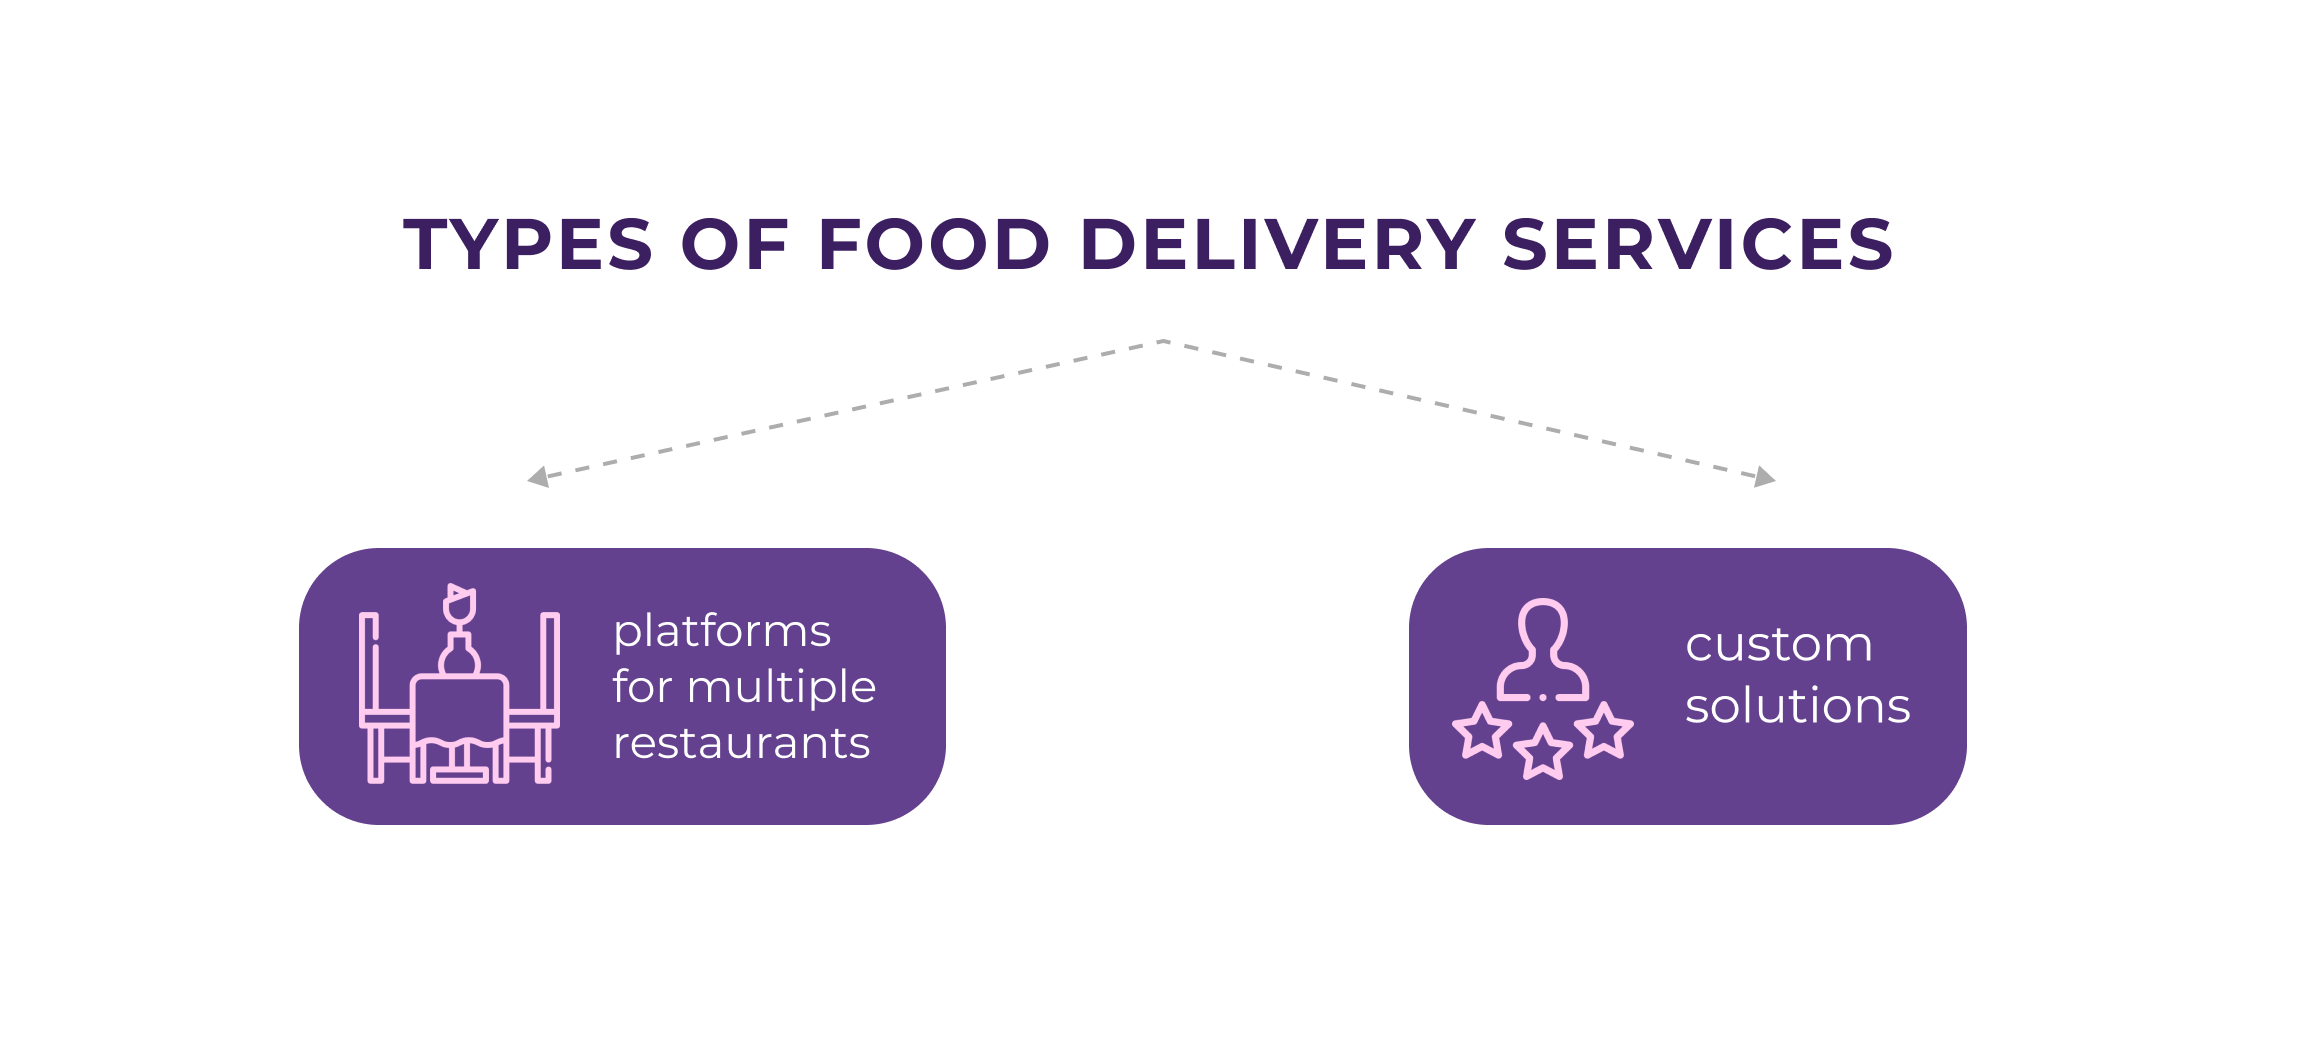 Types of food delivery services 